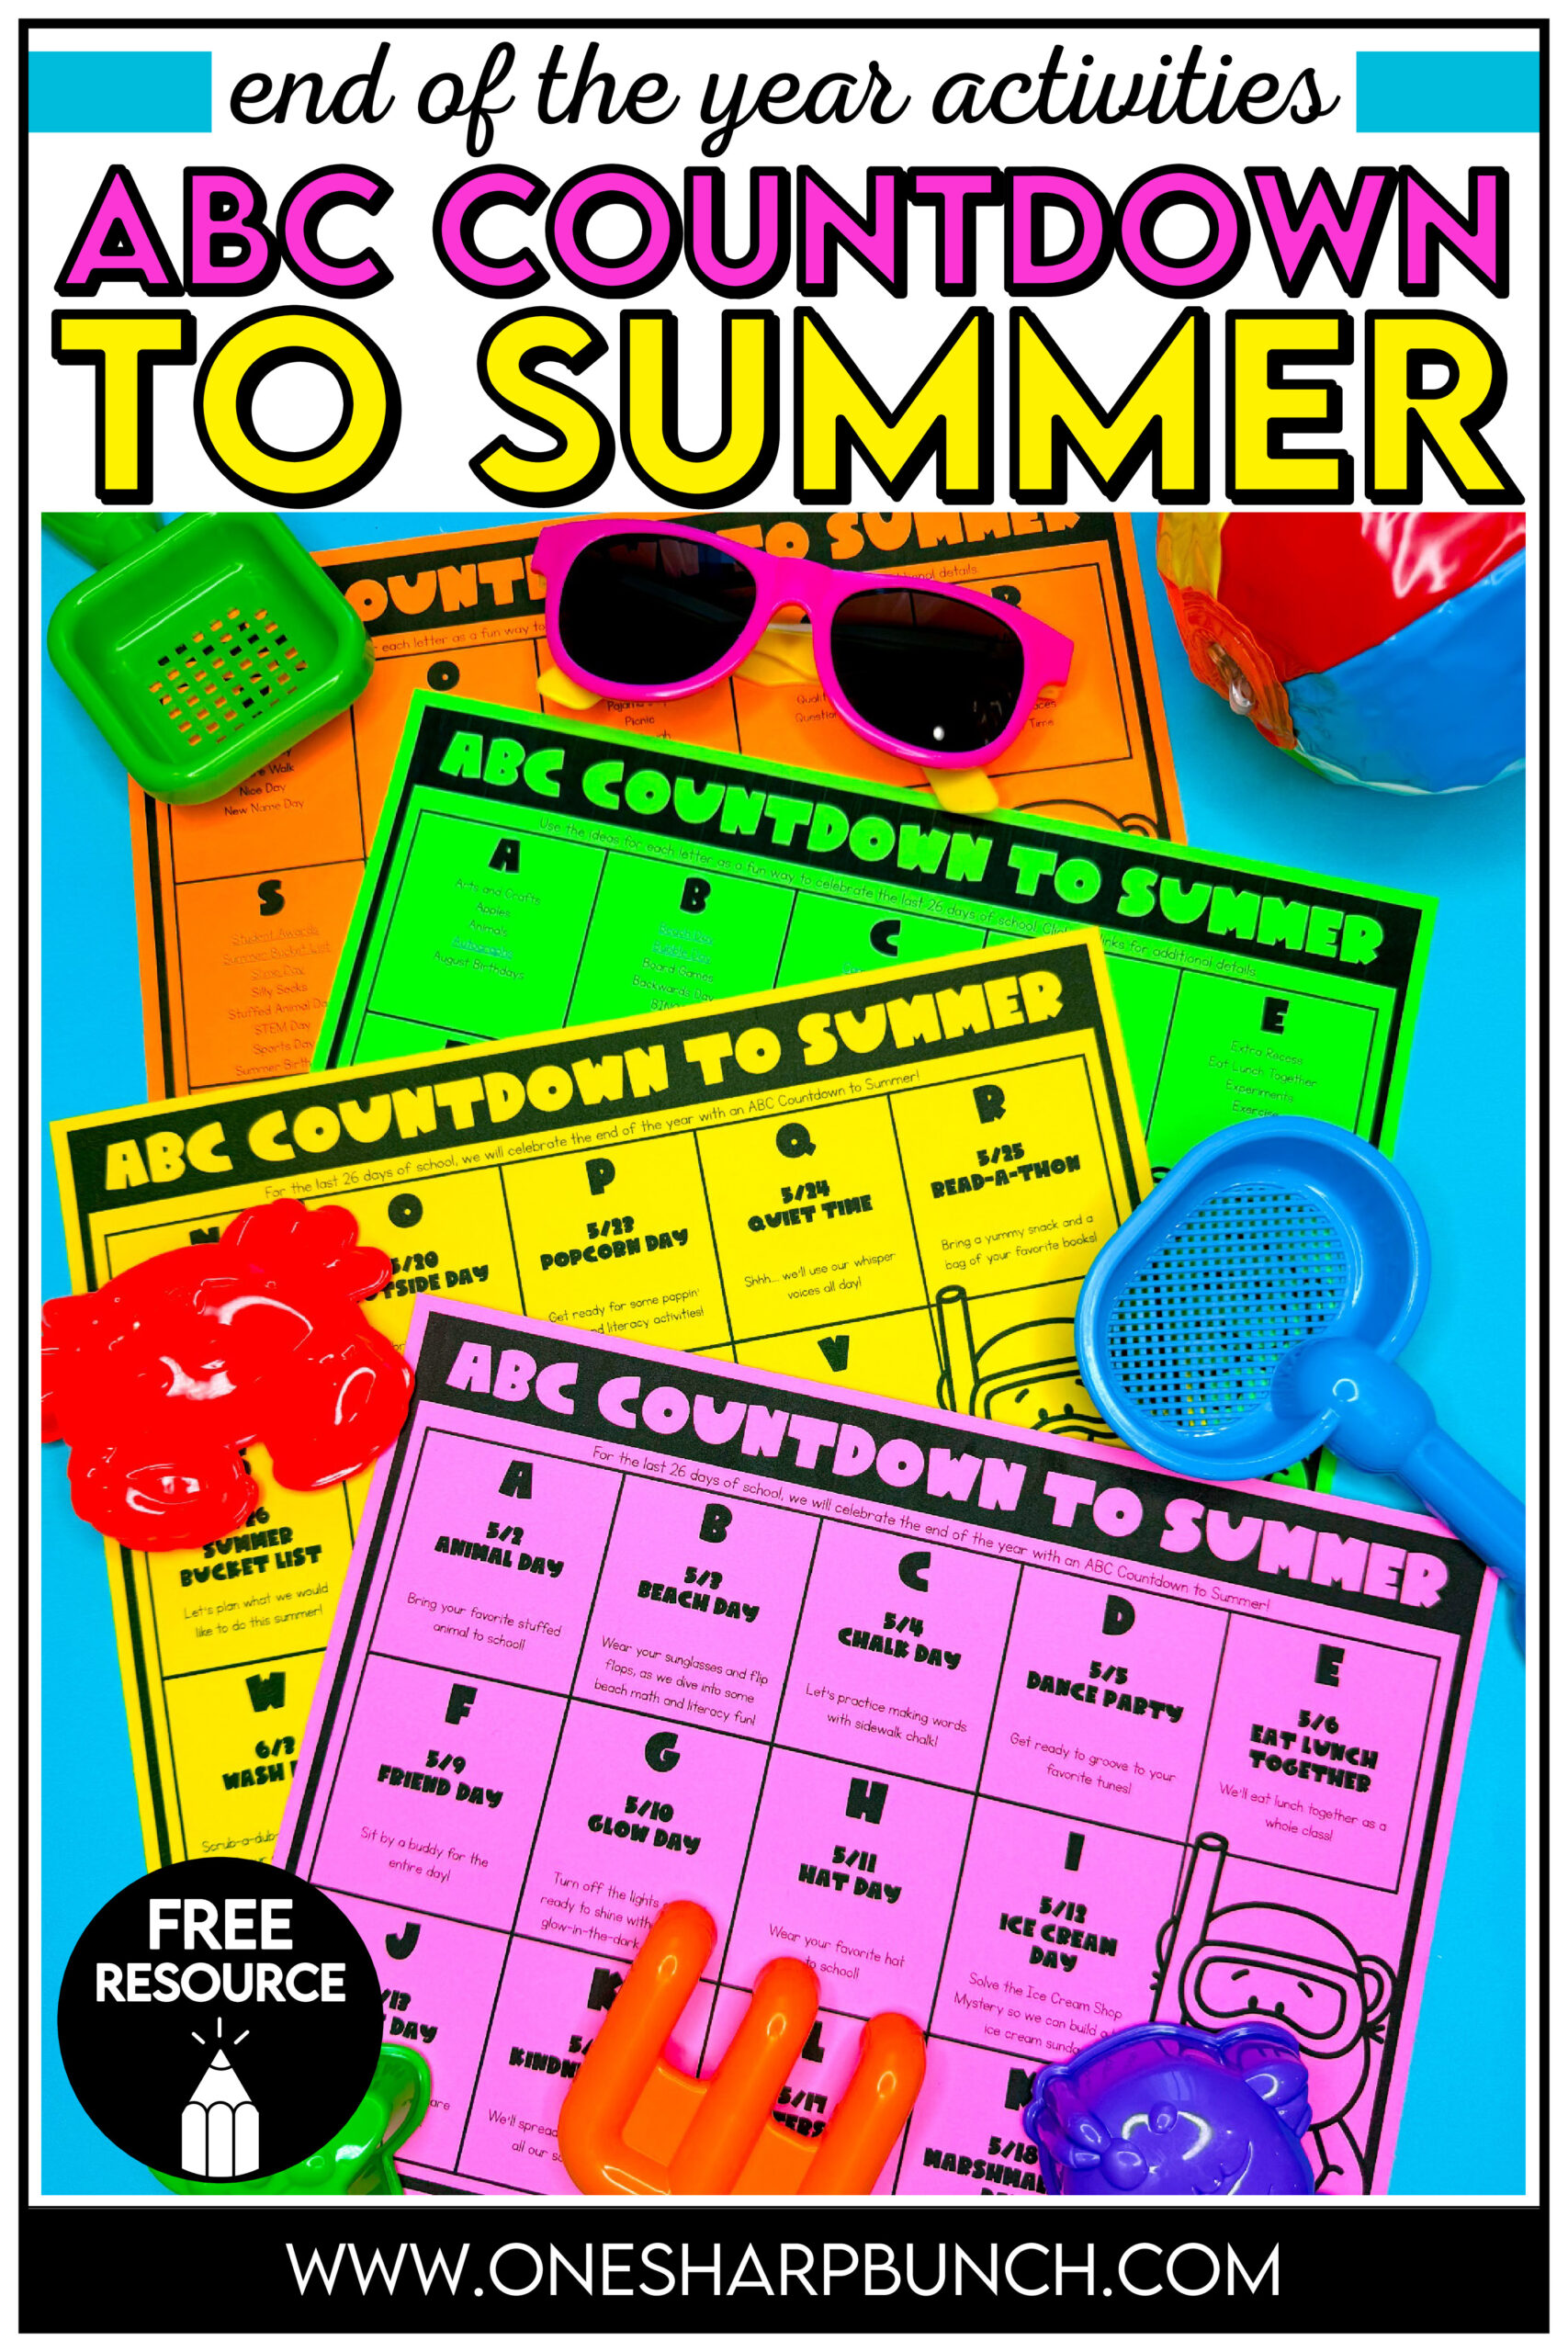 Celebrate the end of the year with these ABC countdown ideas! Use the FREE ABC countdown calendar to help plan the last 26 days of school! Your students will love these alphabet countdown ideas as they gear up for summer. These end of the year activities are fun but also allow students to continue learning all the way up until the last day of school. The ABC countdown to summer activities include classroom theme days, reading end of the year books, end of the year crafts, silly days and more!